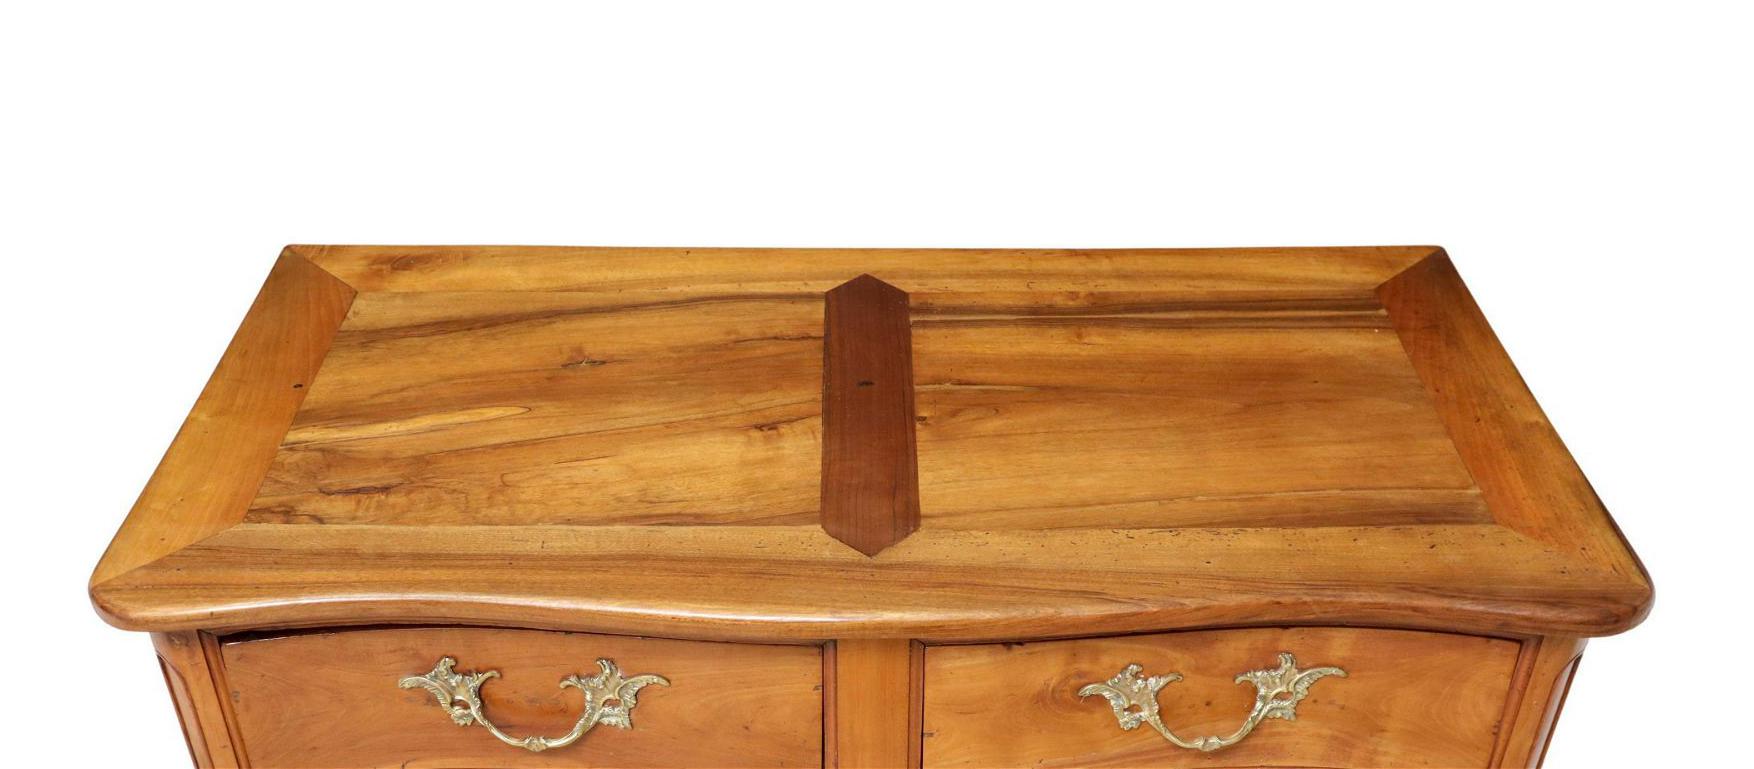 Hand-Carved Mid 18th Century Antique French Louis XV Period Walnut & Fruitwood Commode For Sale